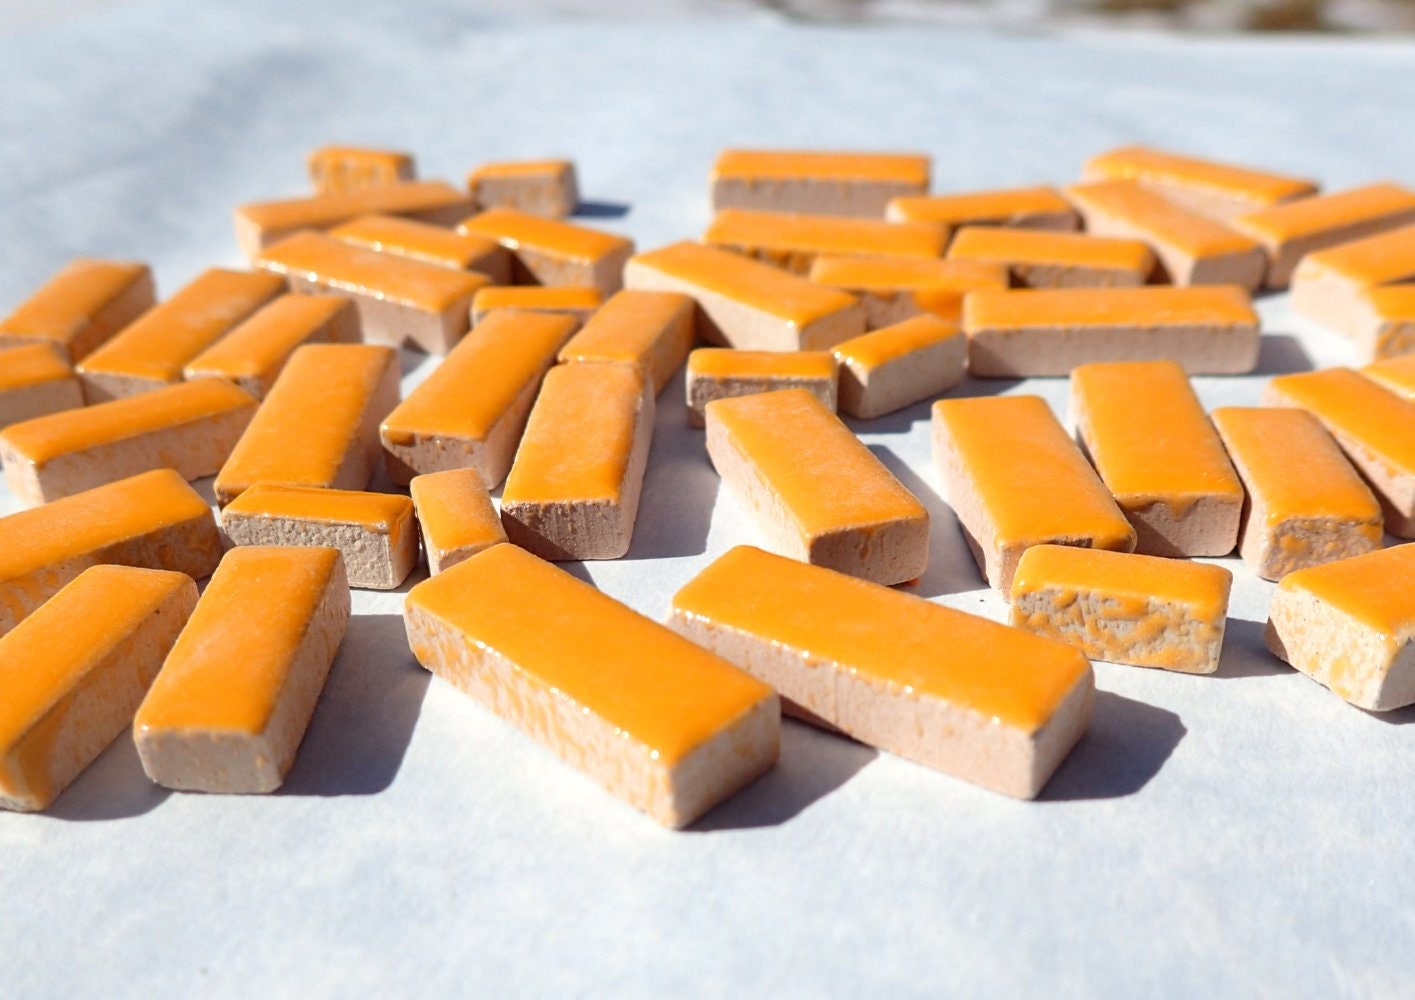 Ochre Mini Rectangles Mosaic Tiles - 50g Ceramic in Mix of 3 Sizes 3/8" and 5/8" and 3/4" in Curry